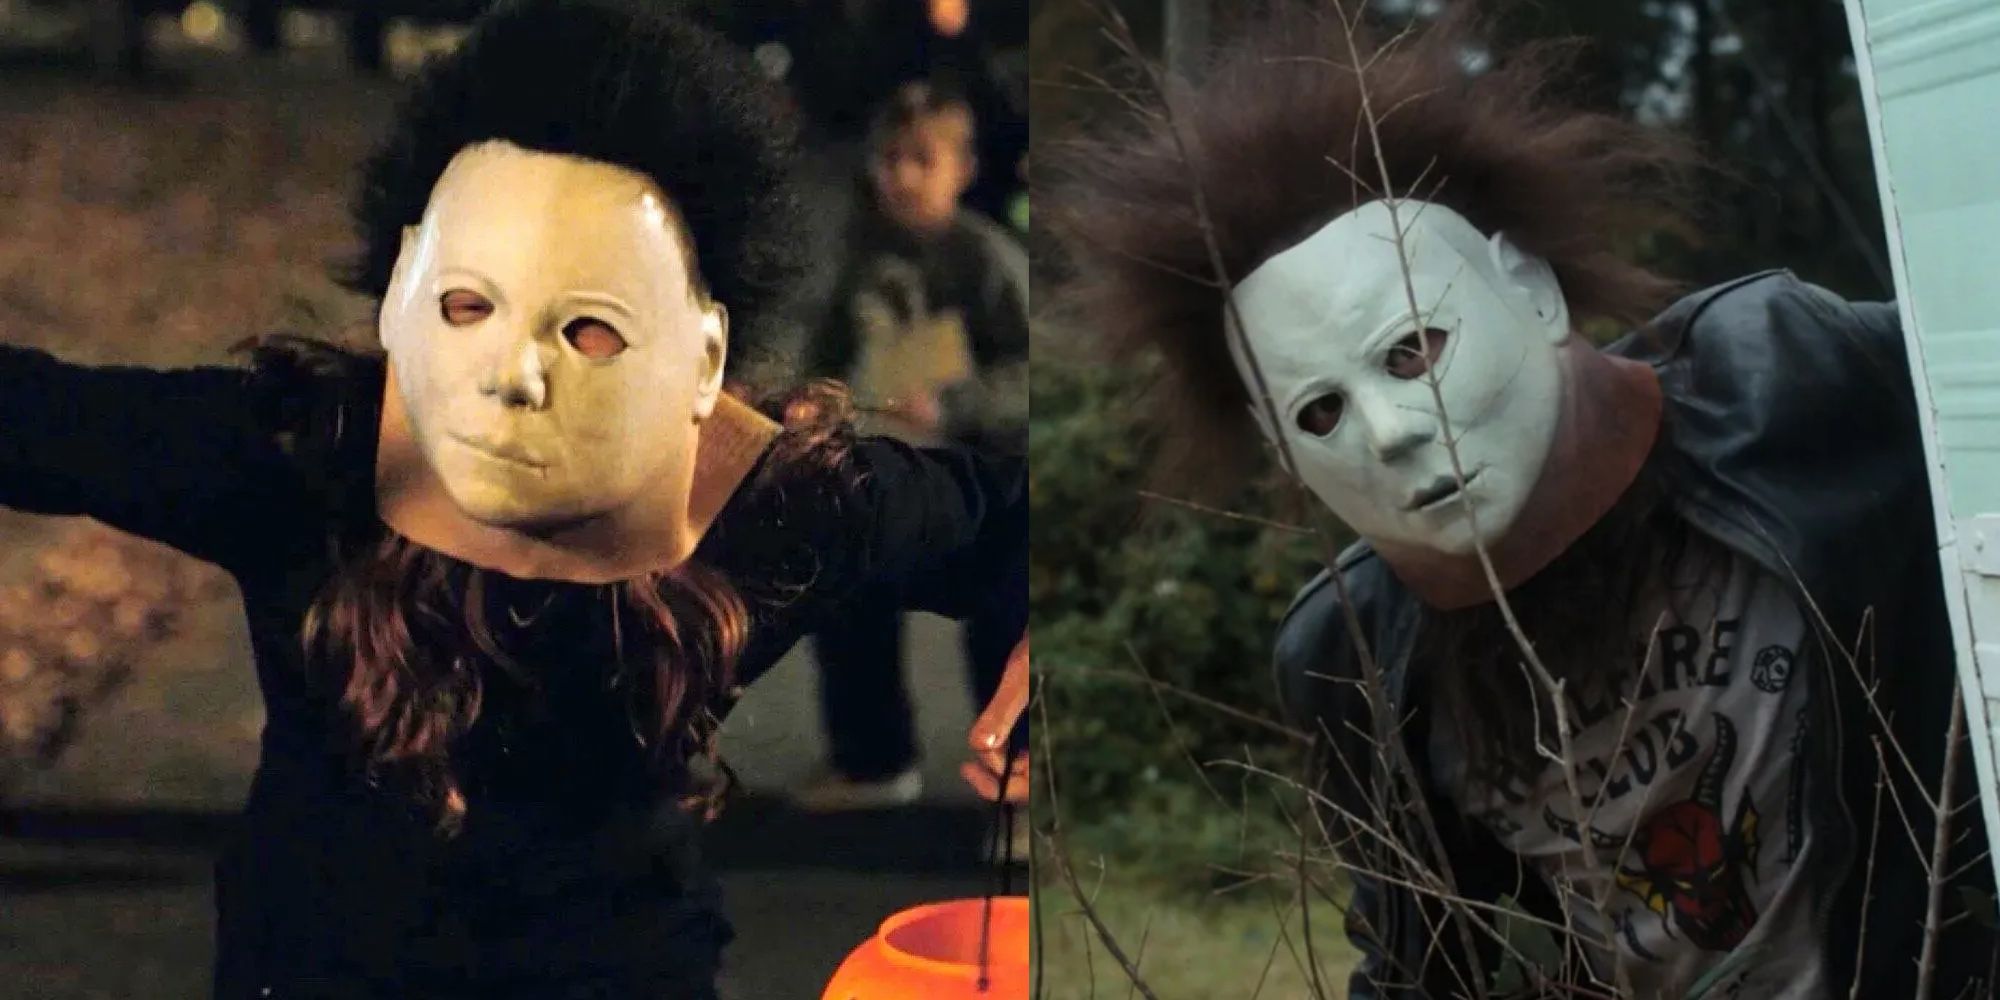 Max and Eddie Wearing Michael Myers Mask